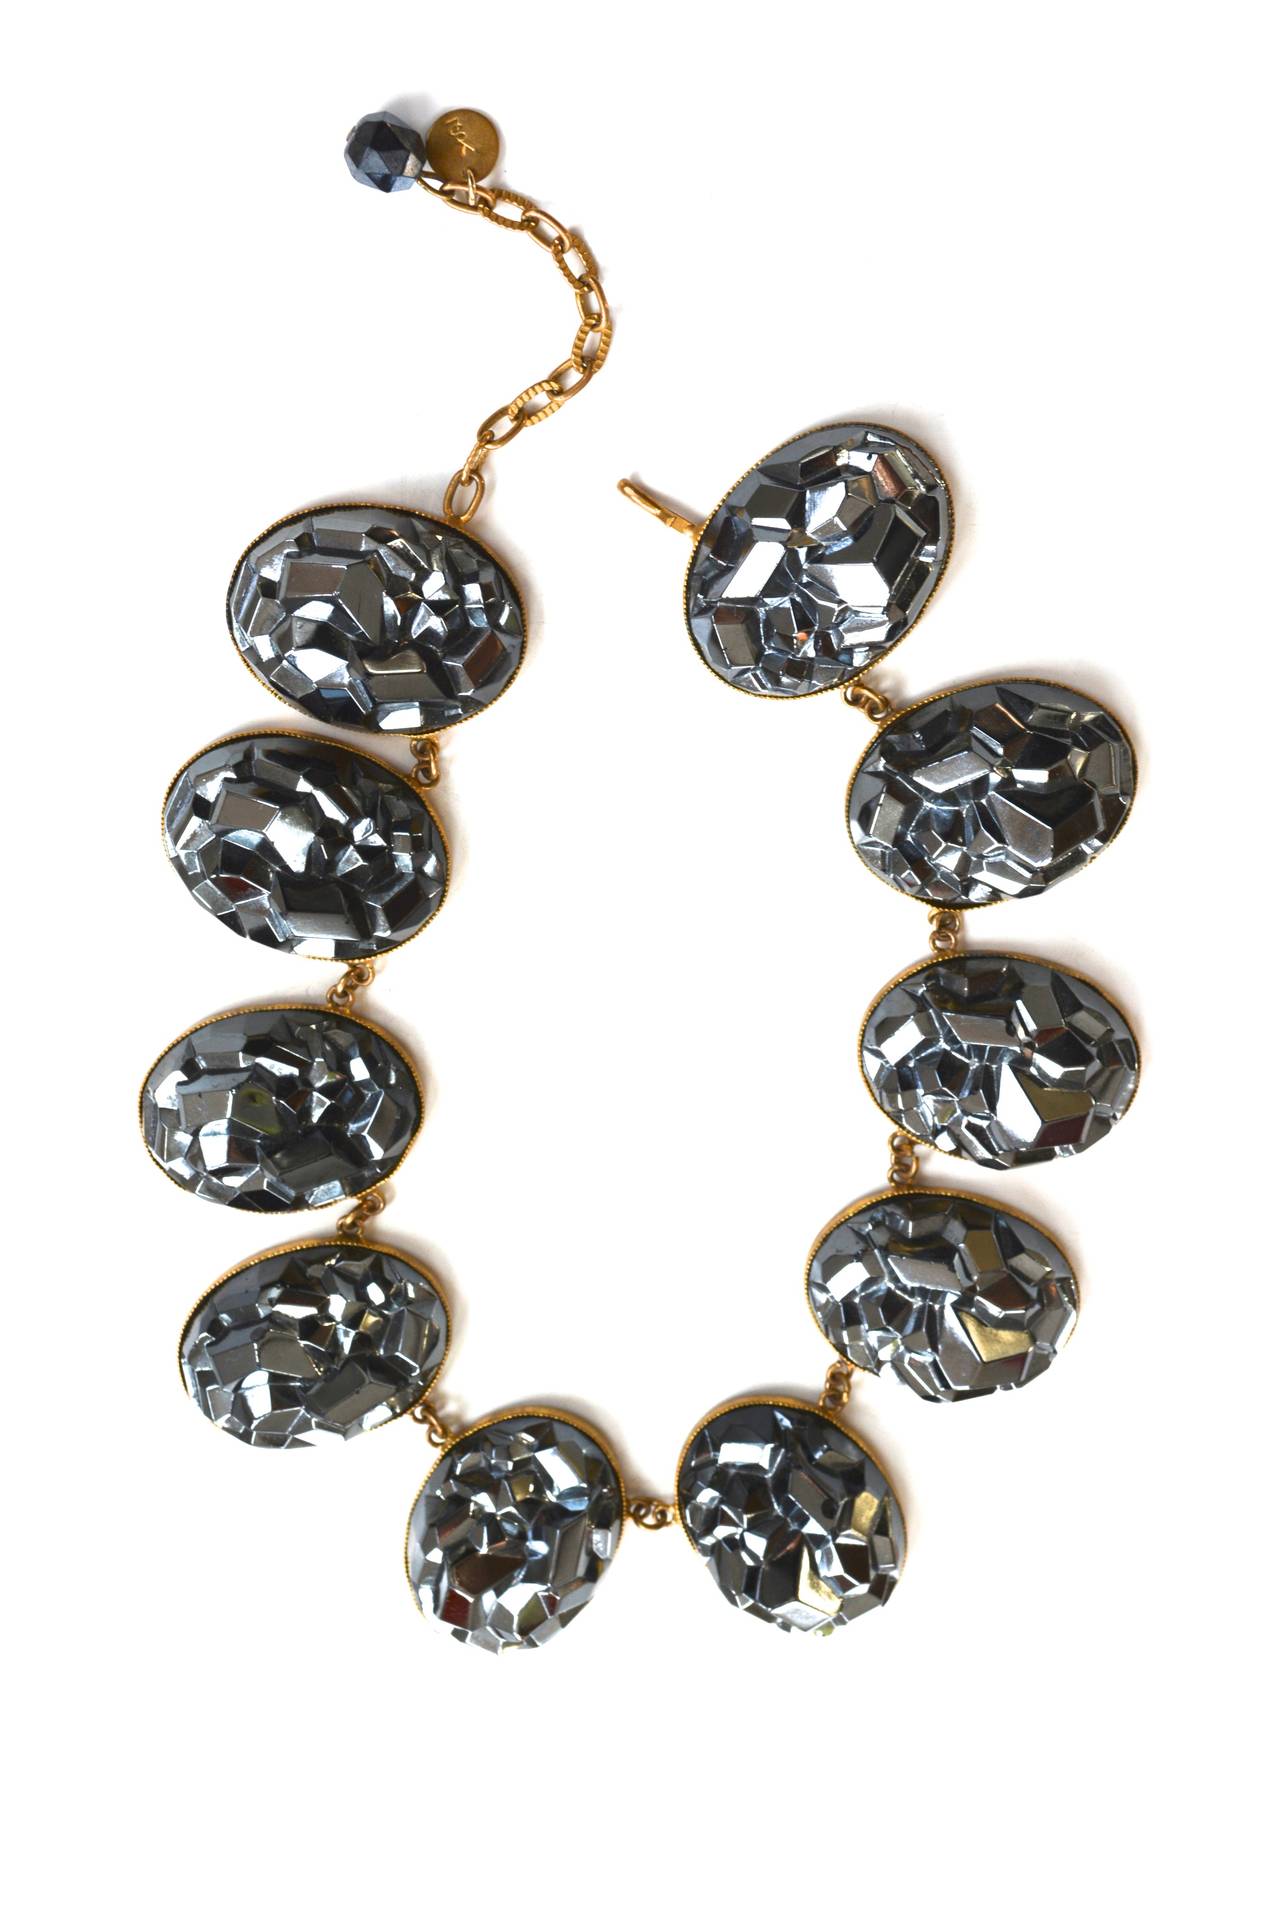 Robert Goossens for Yves Saint Laurent Necklace In Excellent Condition For Sale In Litchfield County, CT